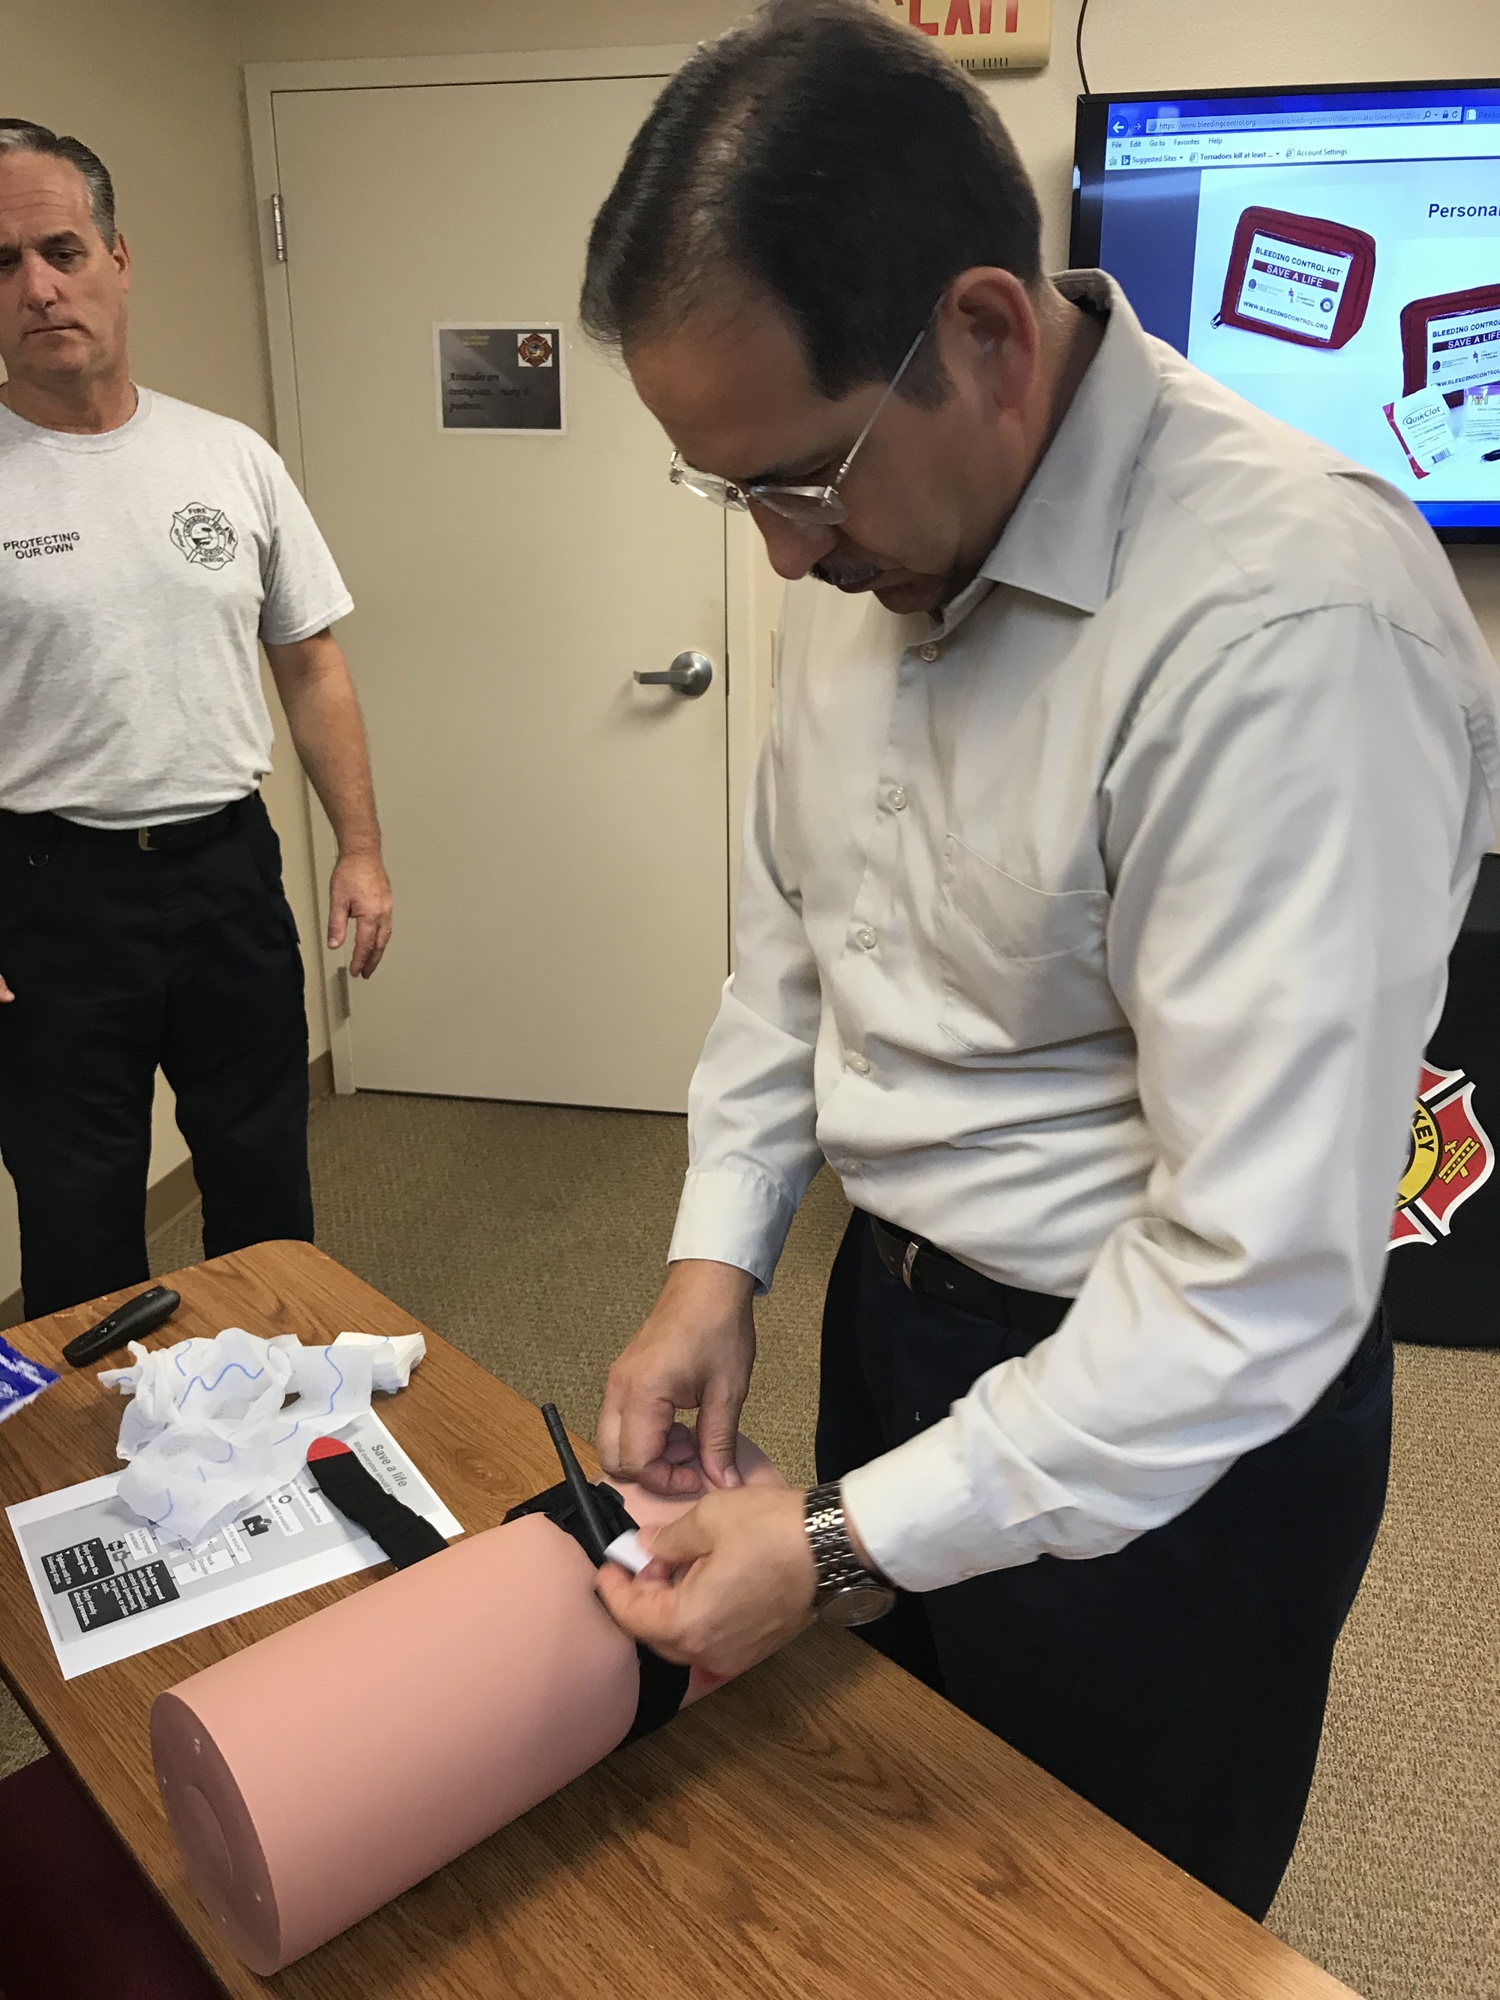 An attendee learns a technique to control bleeding as Longboat Key Fire Chief Paul Dezzi observes at a Stop the Bleed training session. (Photo courtesy of Longboat Key Fire Rescue Department)